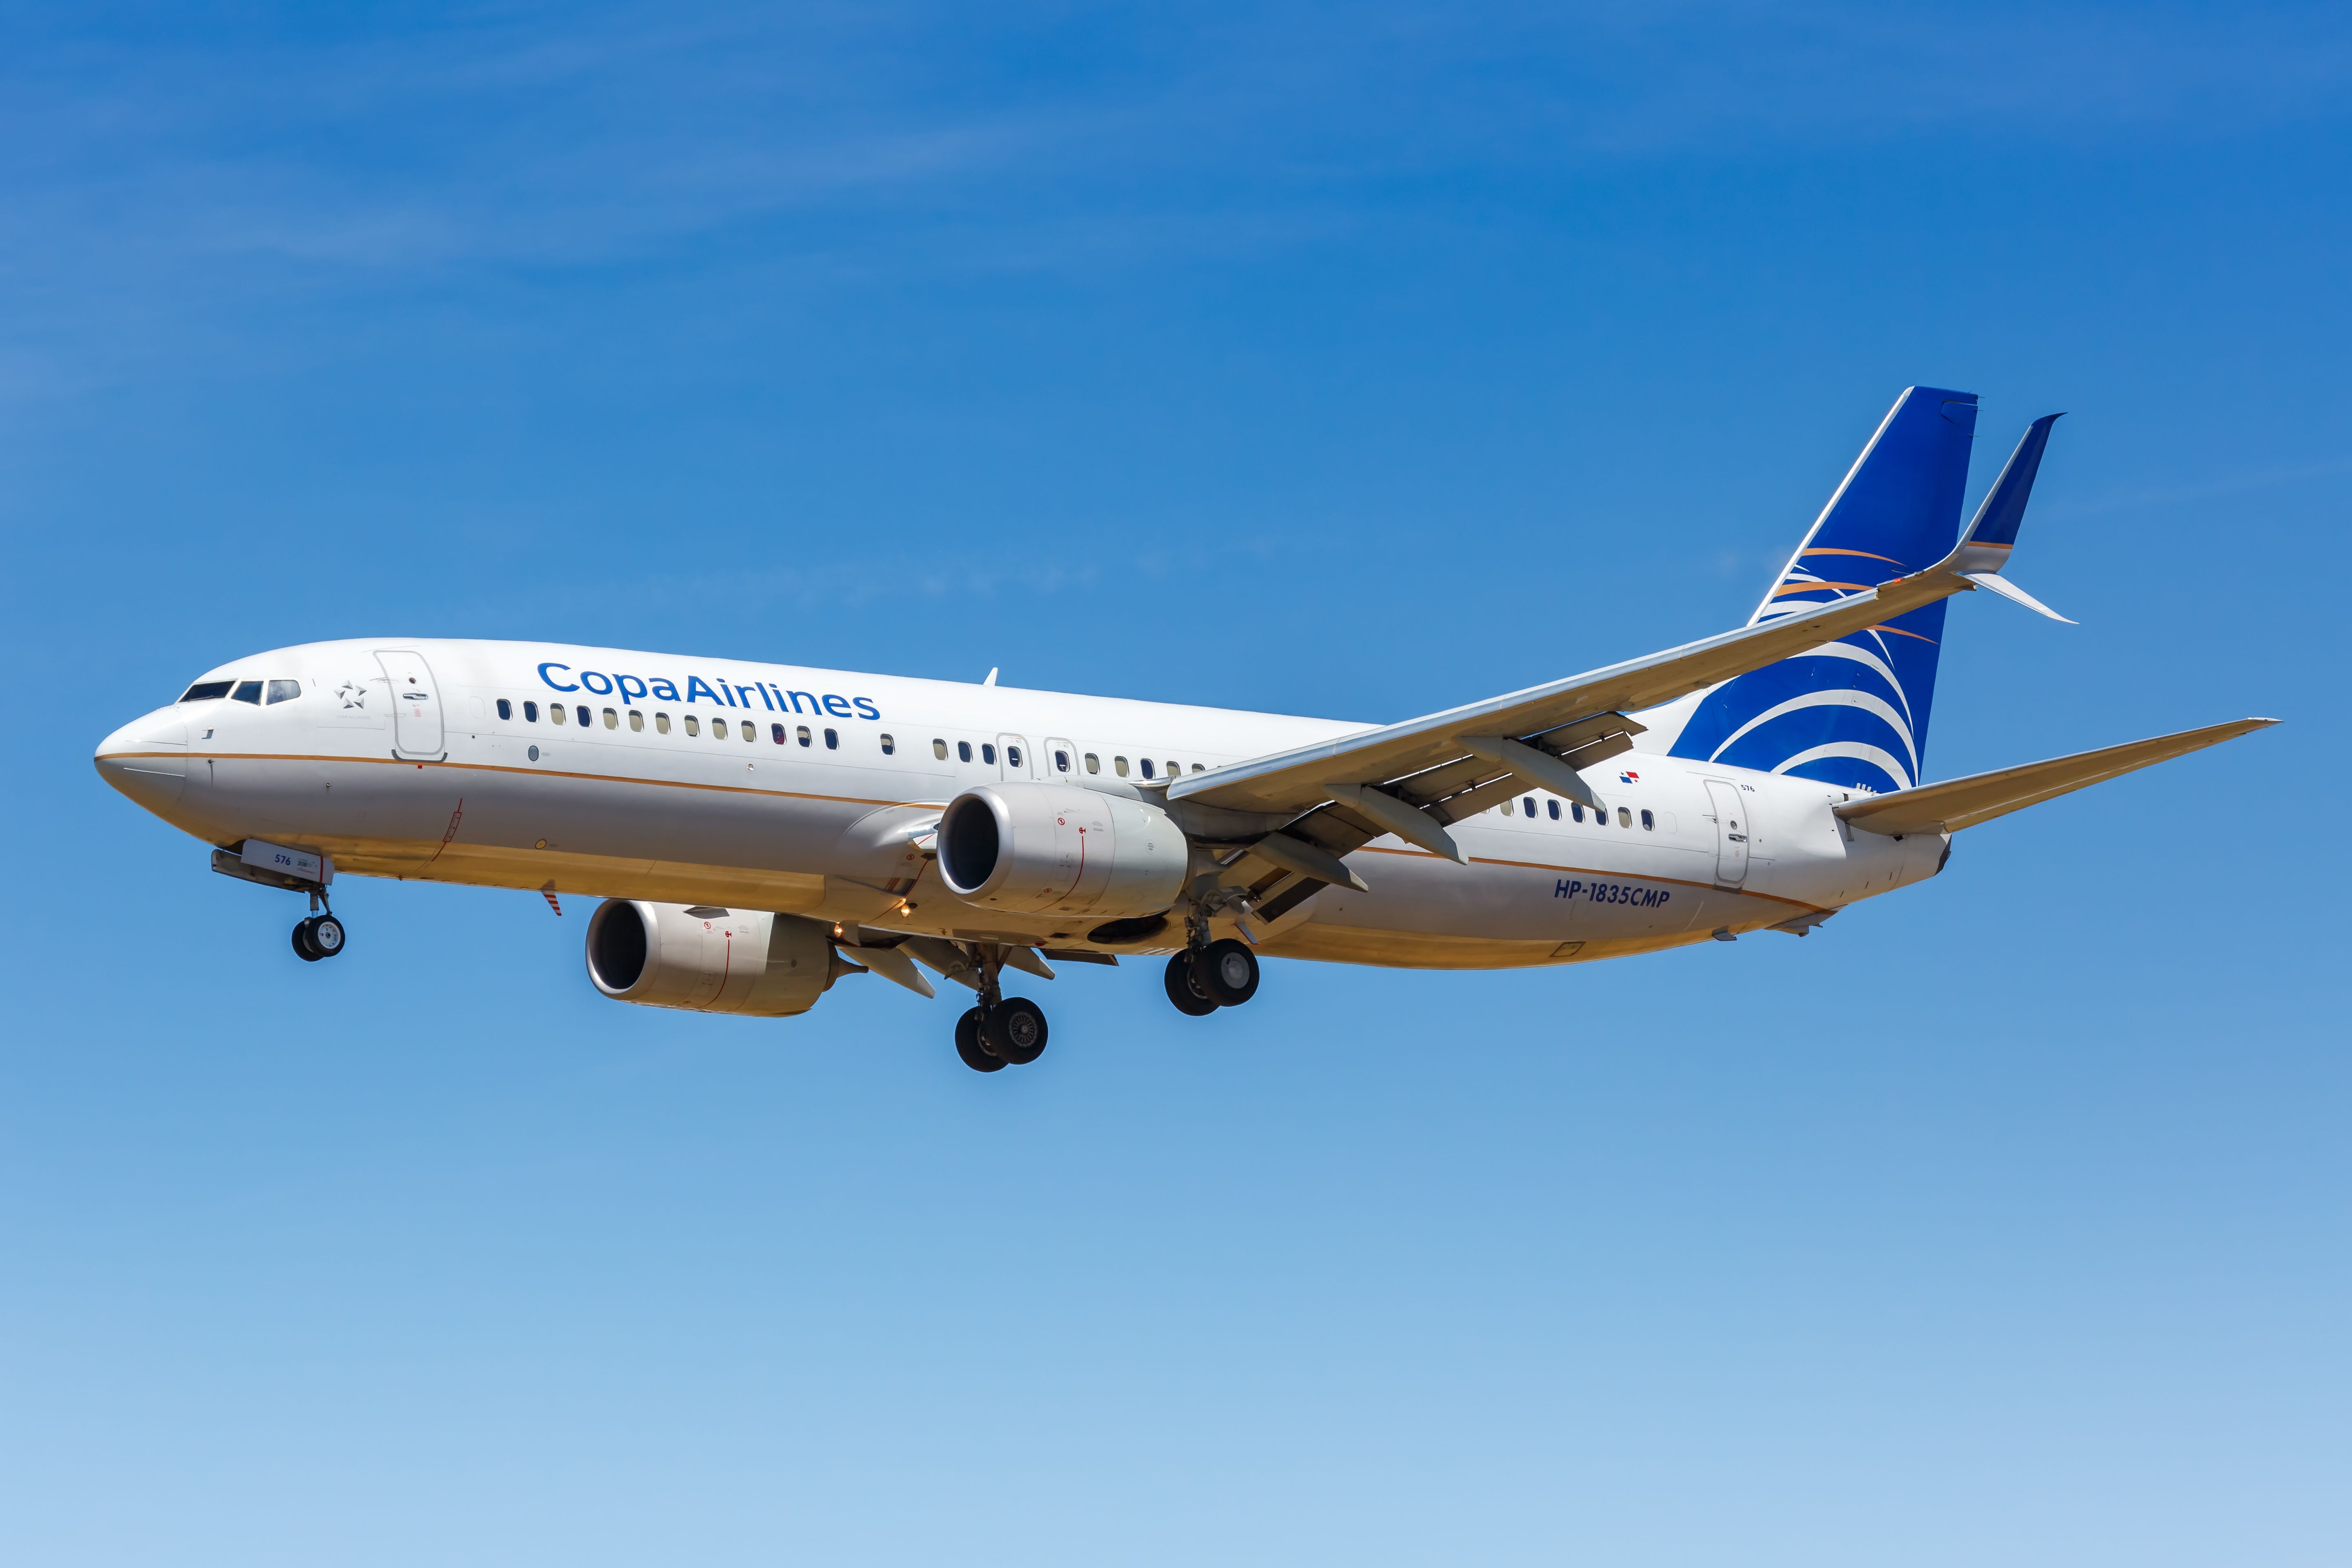 A Copa Airlines Boeing 737-800 airplane